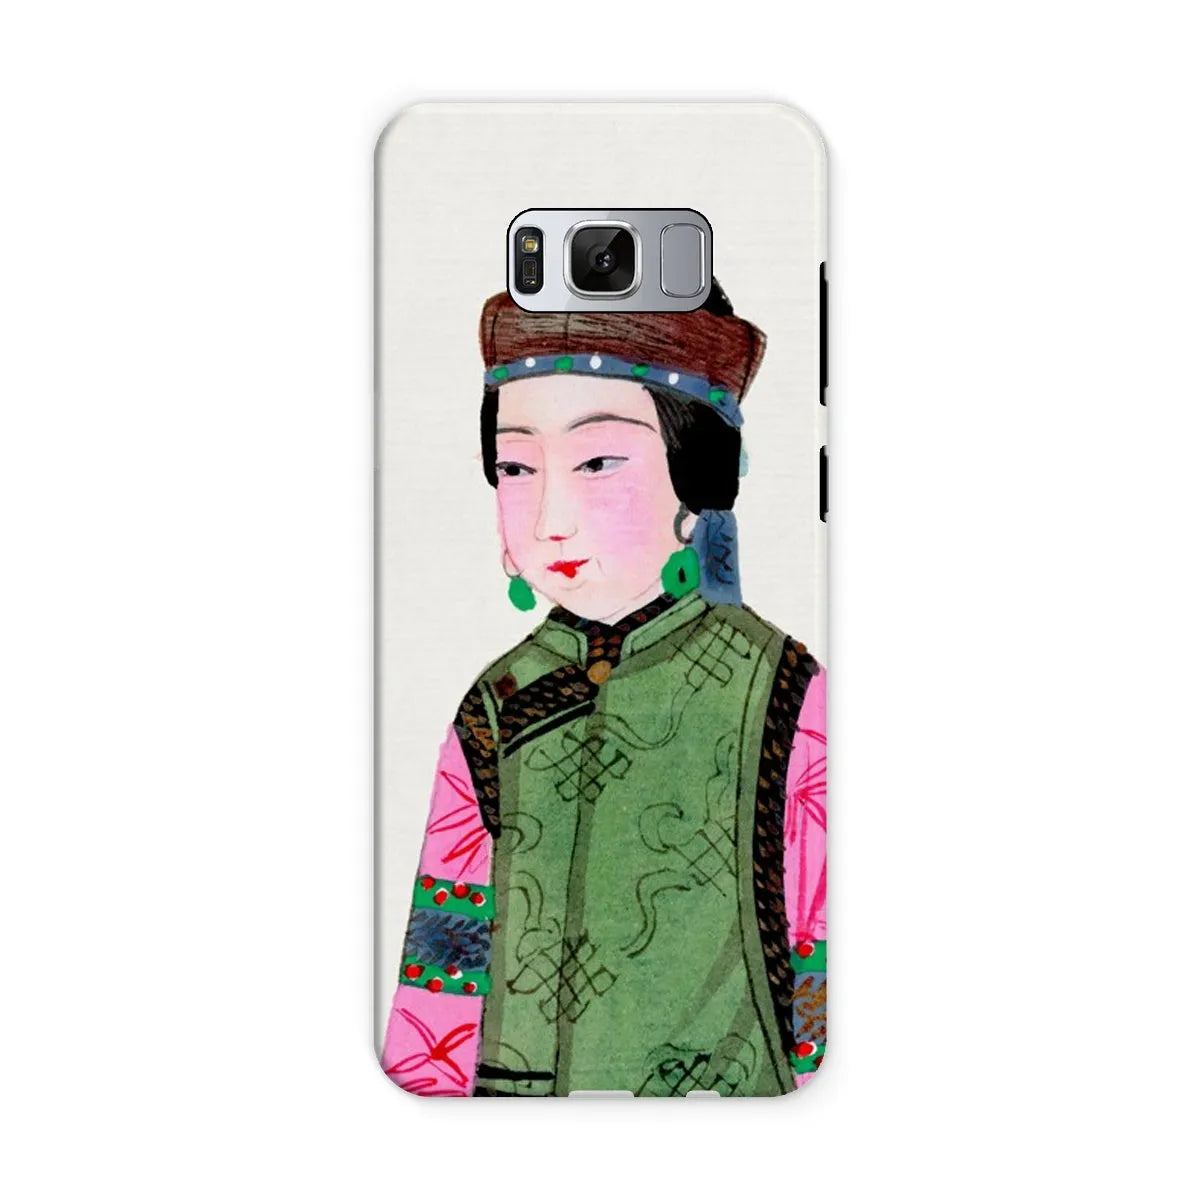 Noblewoman In Winter - Chinese Aesthetic Art Phone Case - Samsung Galaxy S8 / Matte - Mobile Phone Cases - Aesthetic Art